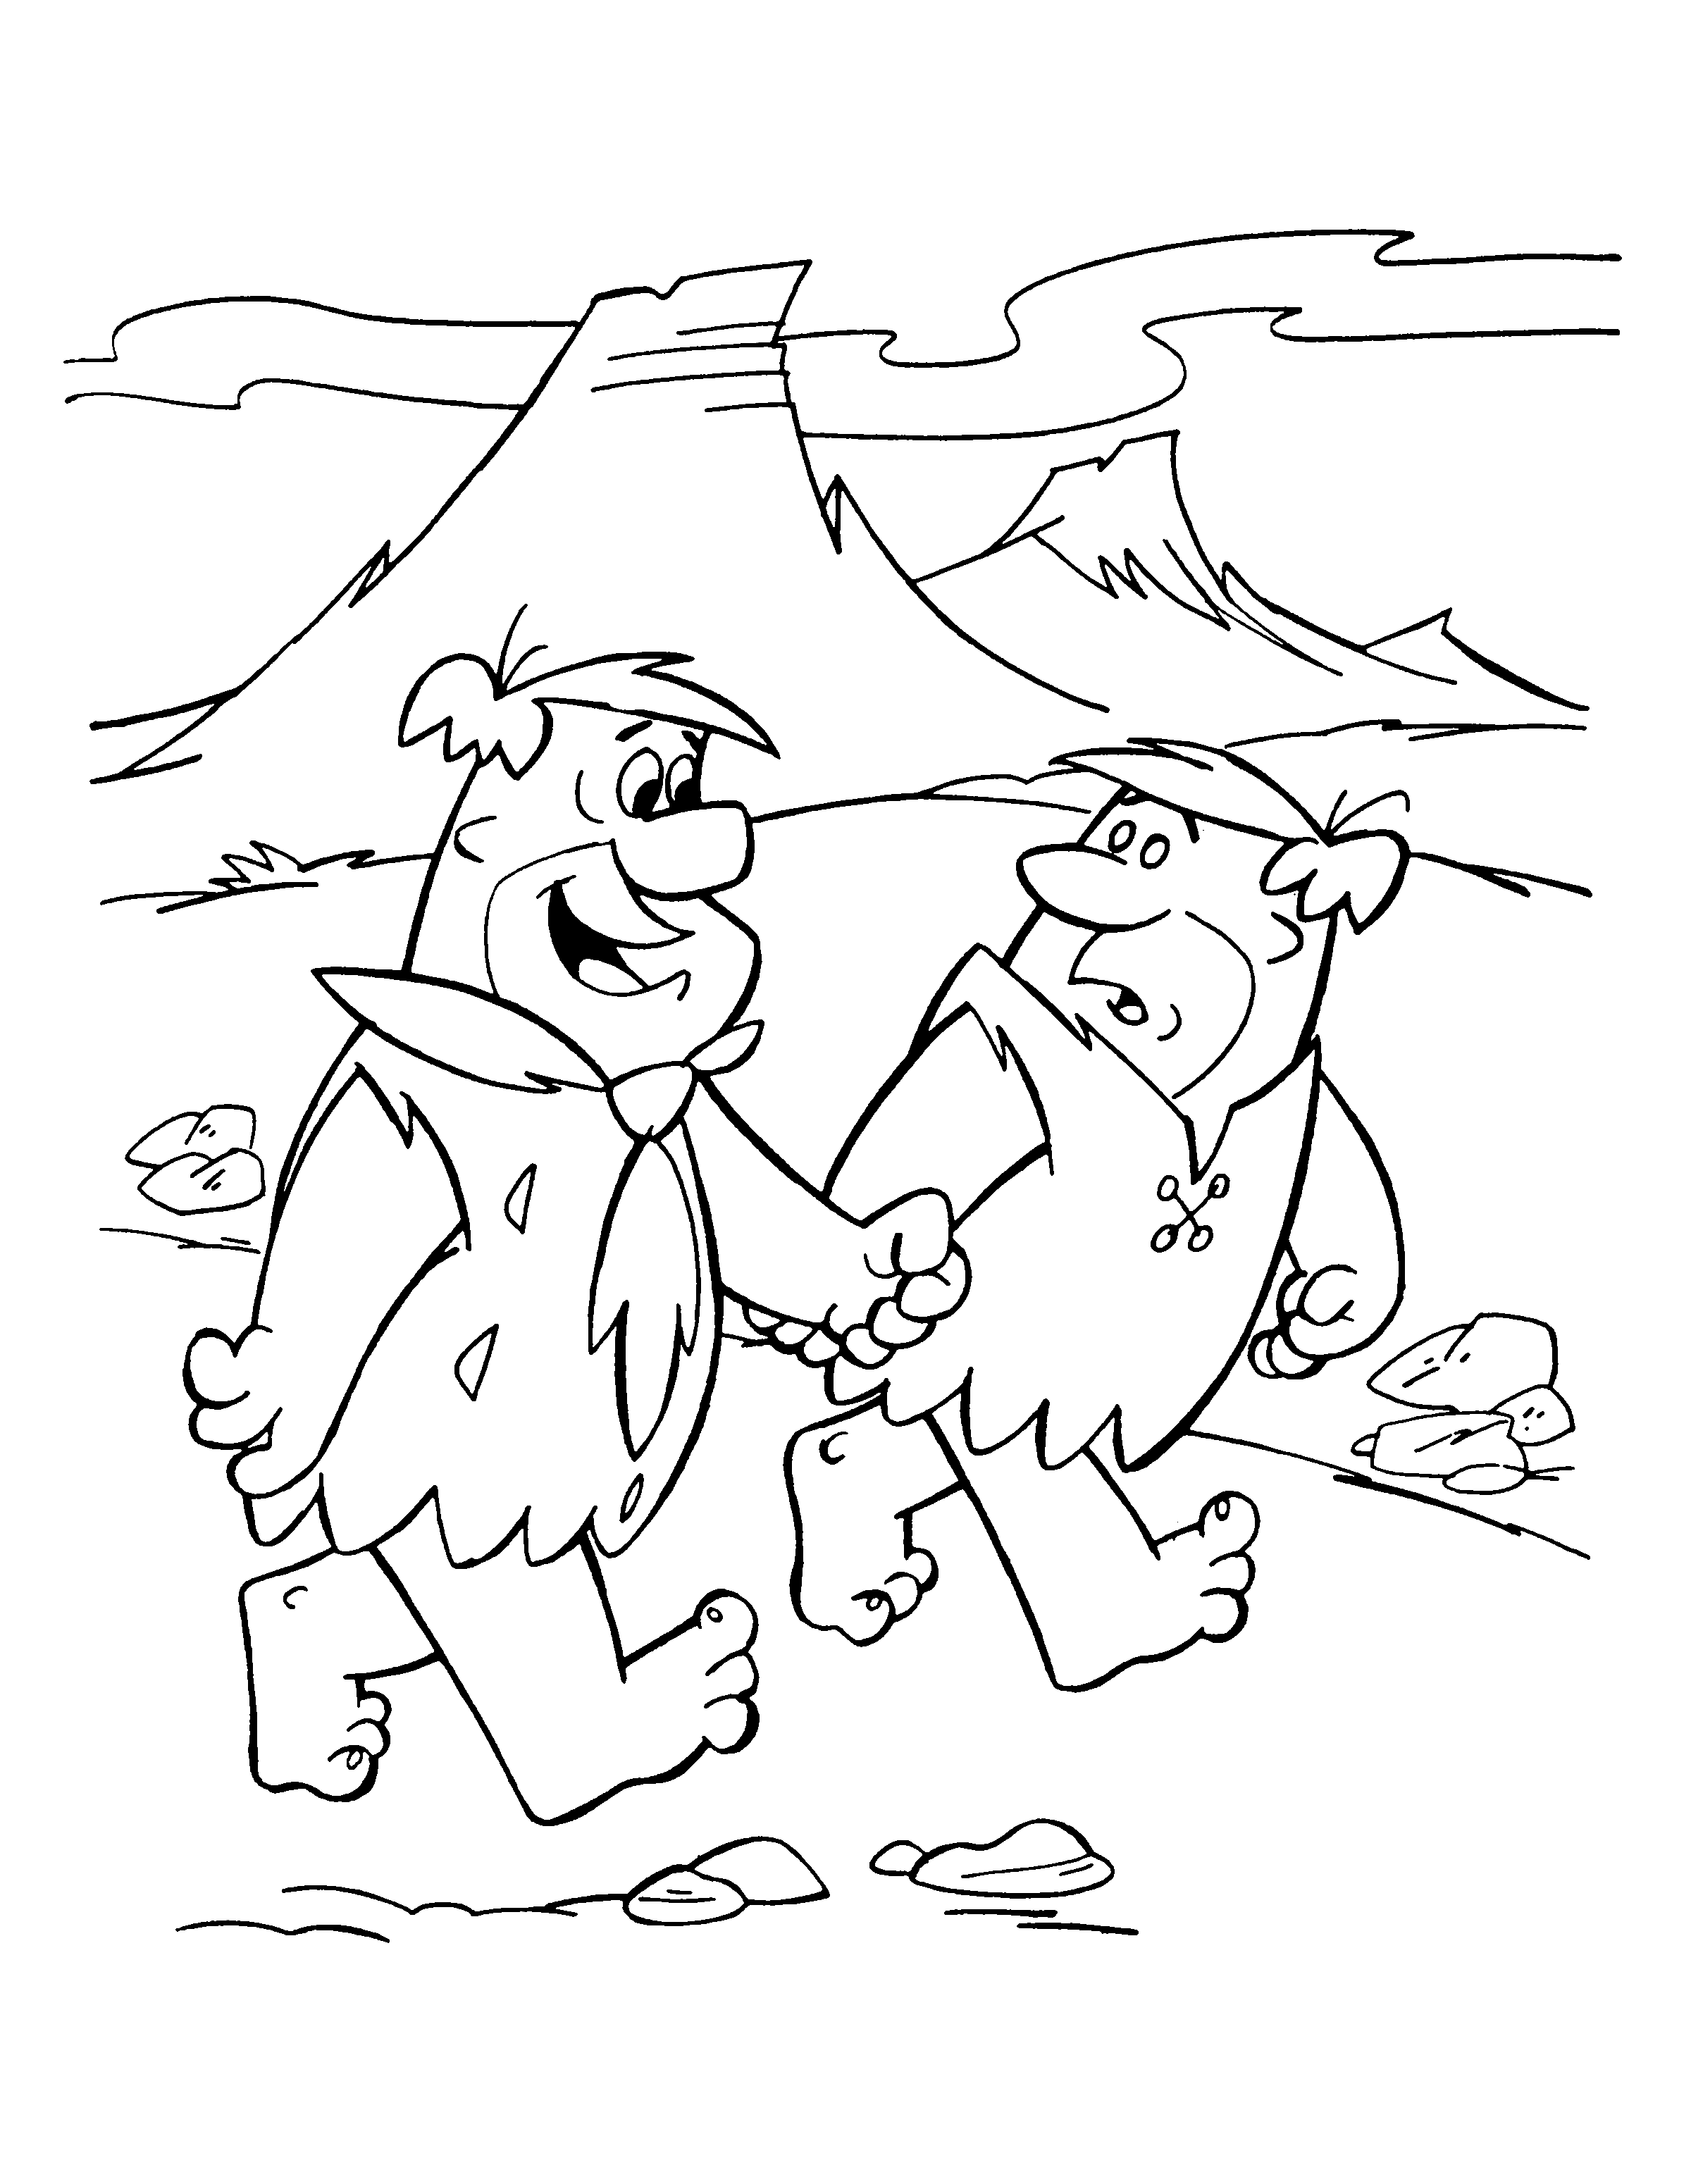 animated-coloring-pages-flintstones-image-0025